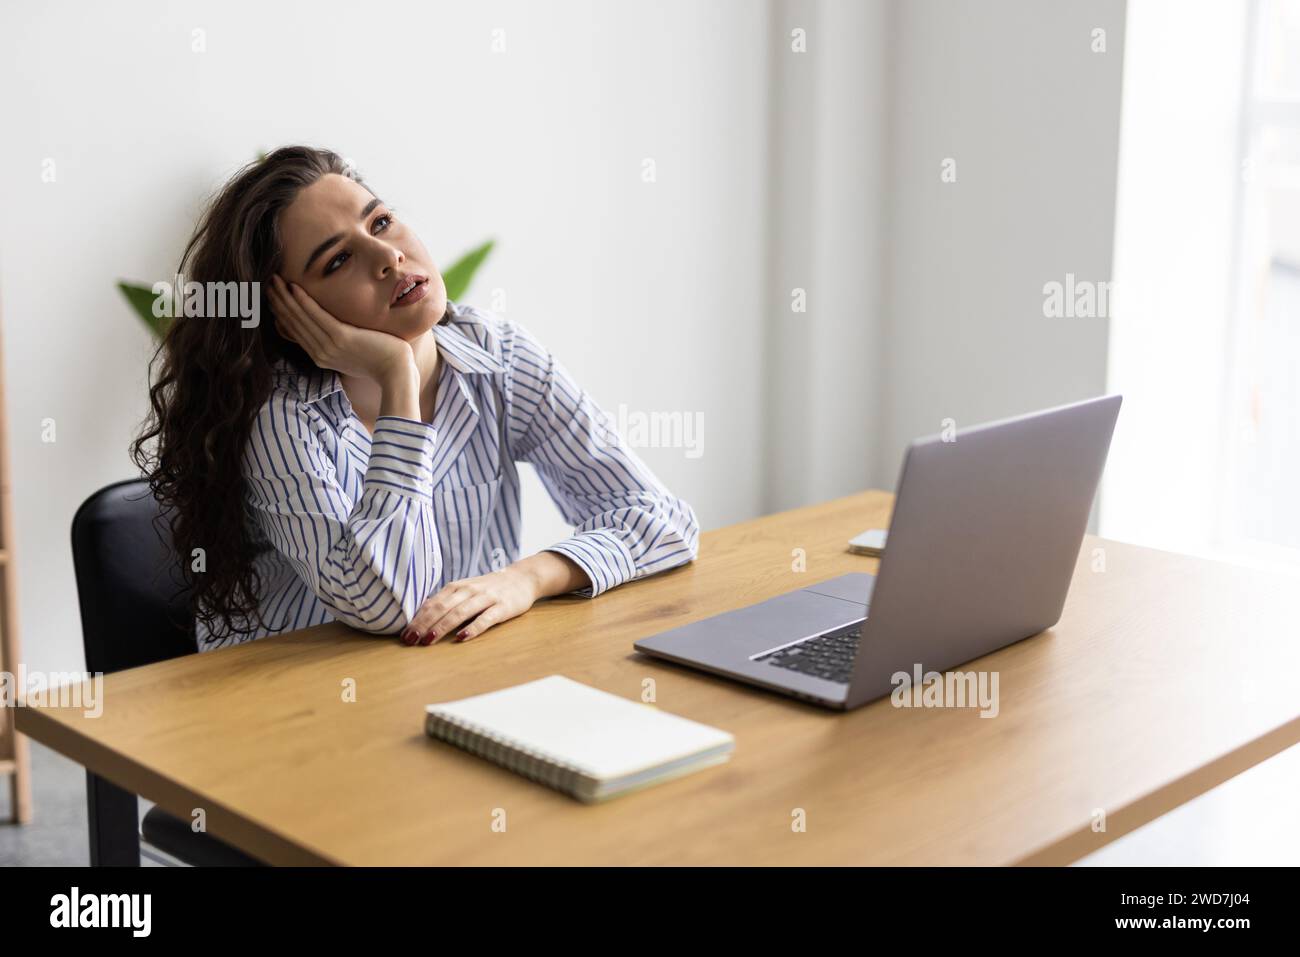 Overworked and tired businesswoman sleeping over a laptop in a desk at work in her office Stock Photo